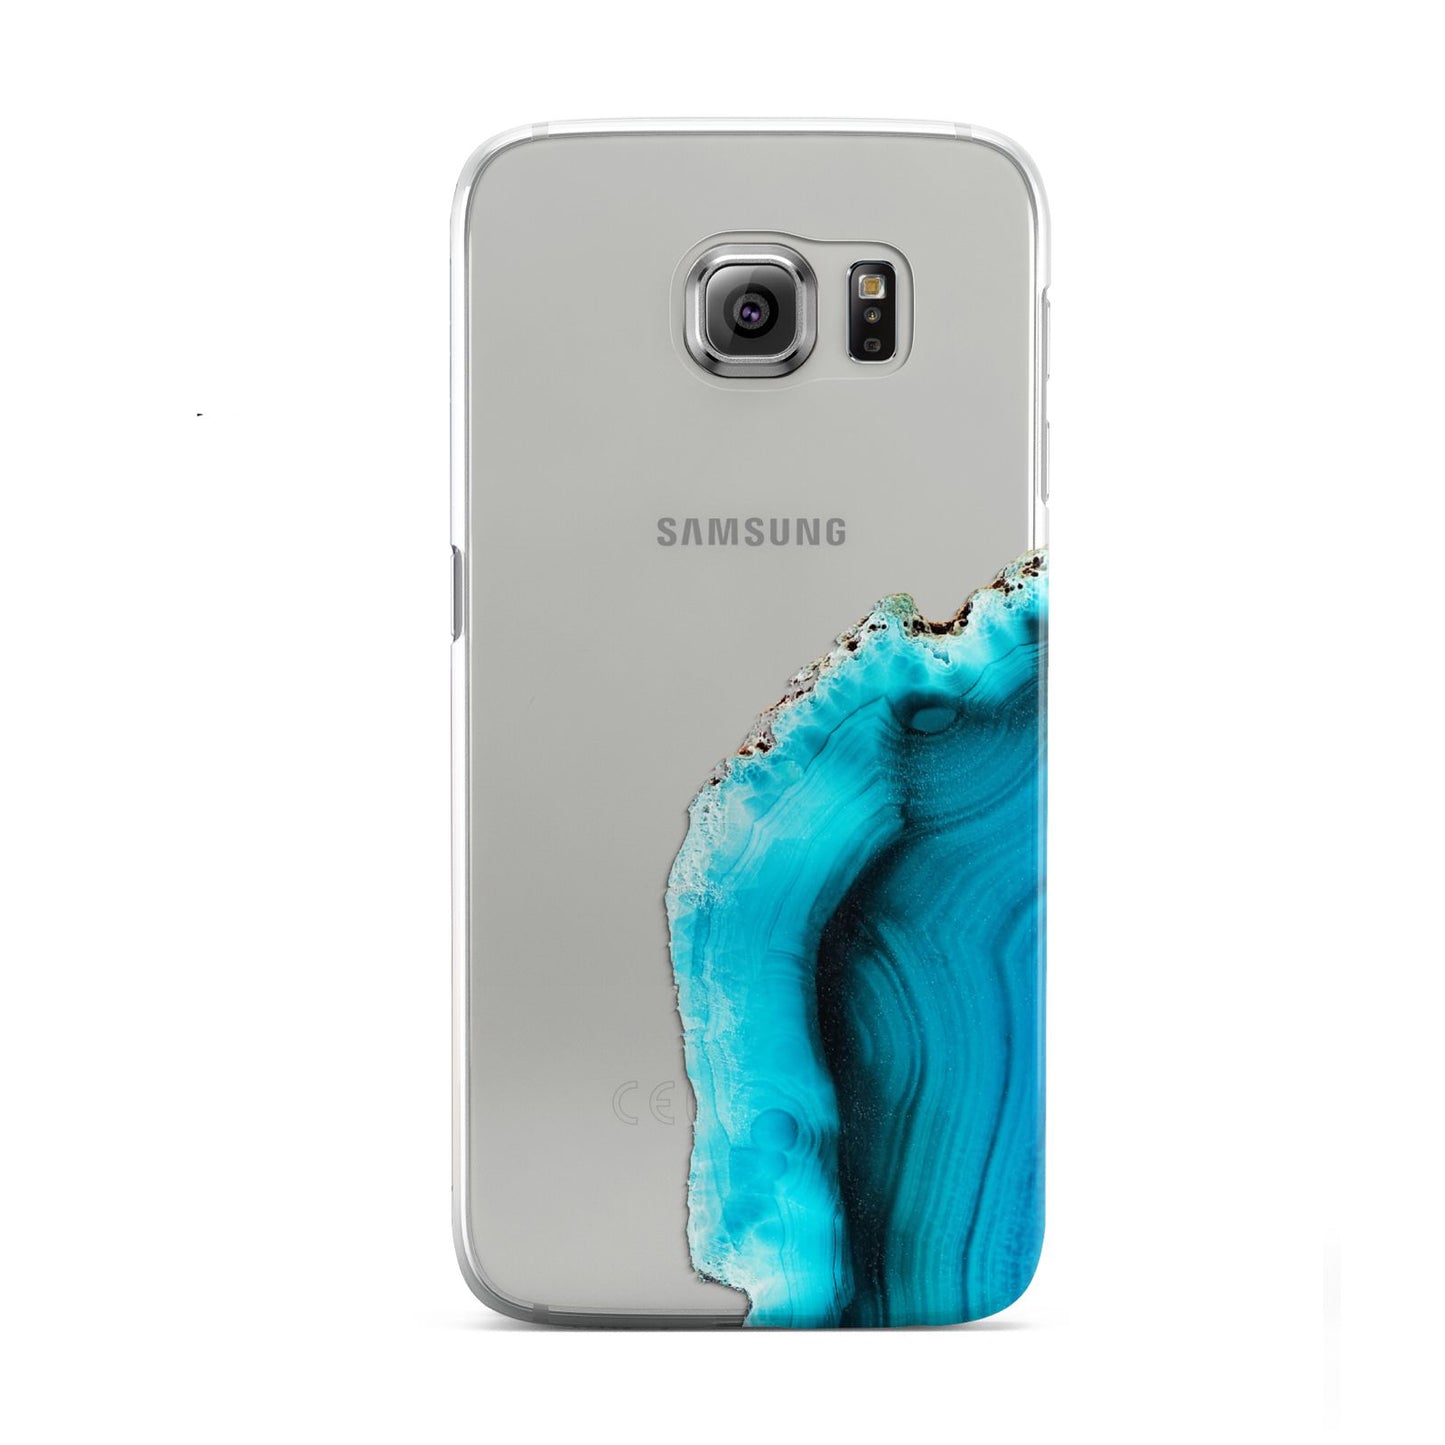 Agate Blue Turquoise Samsung Galaxy S6 Case